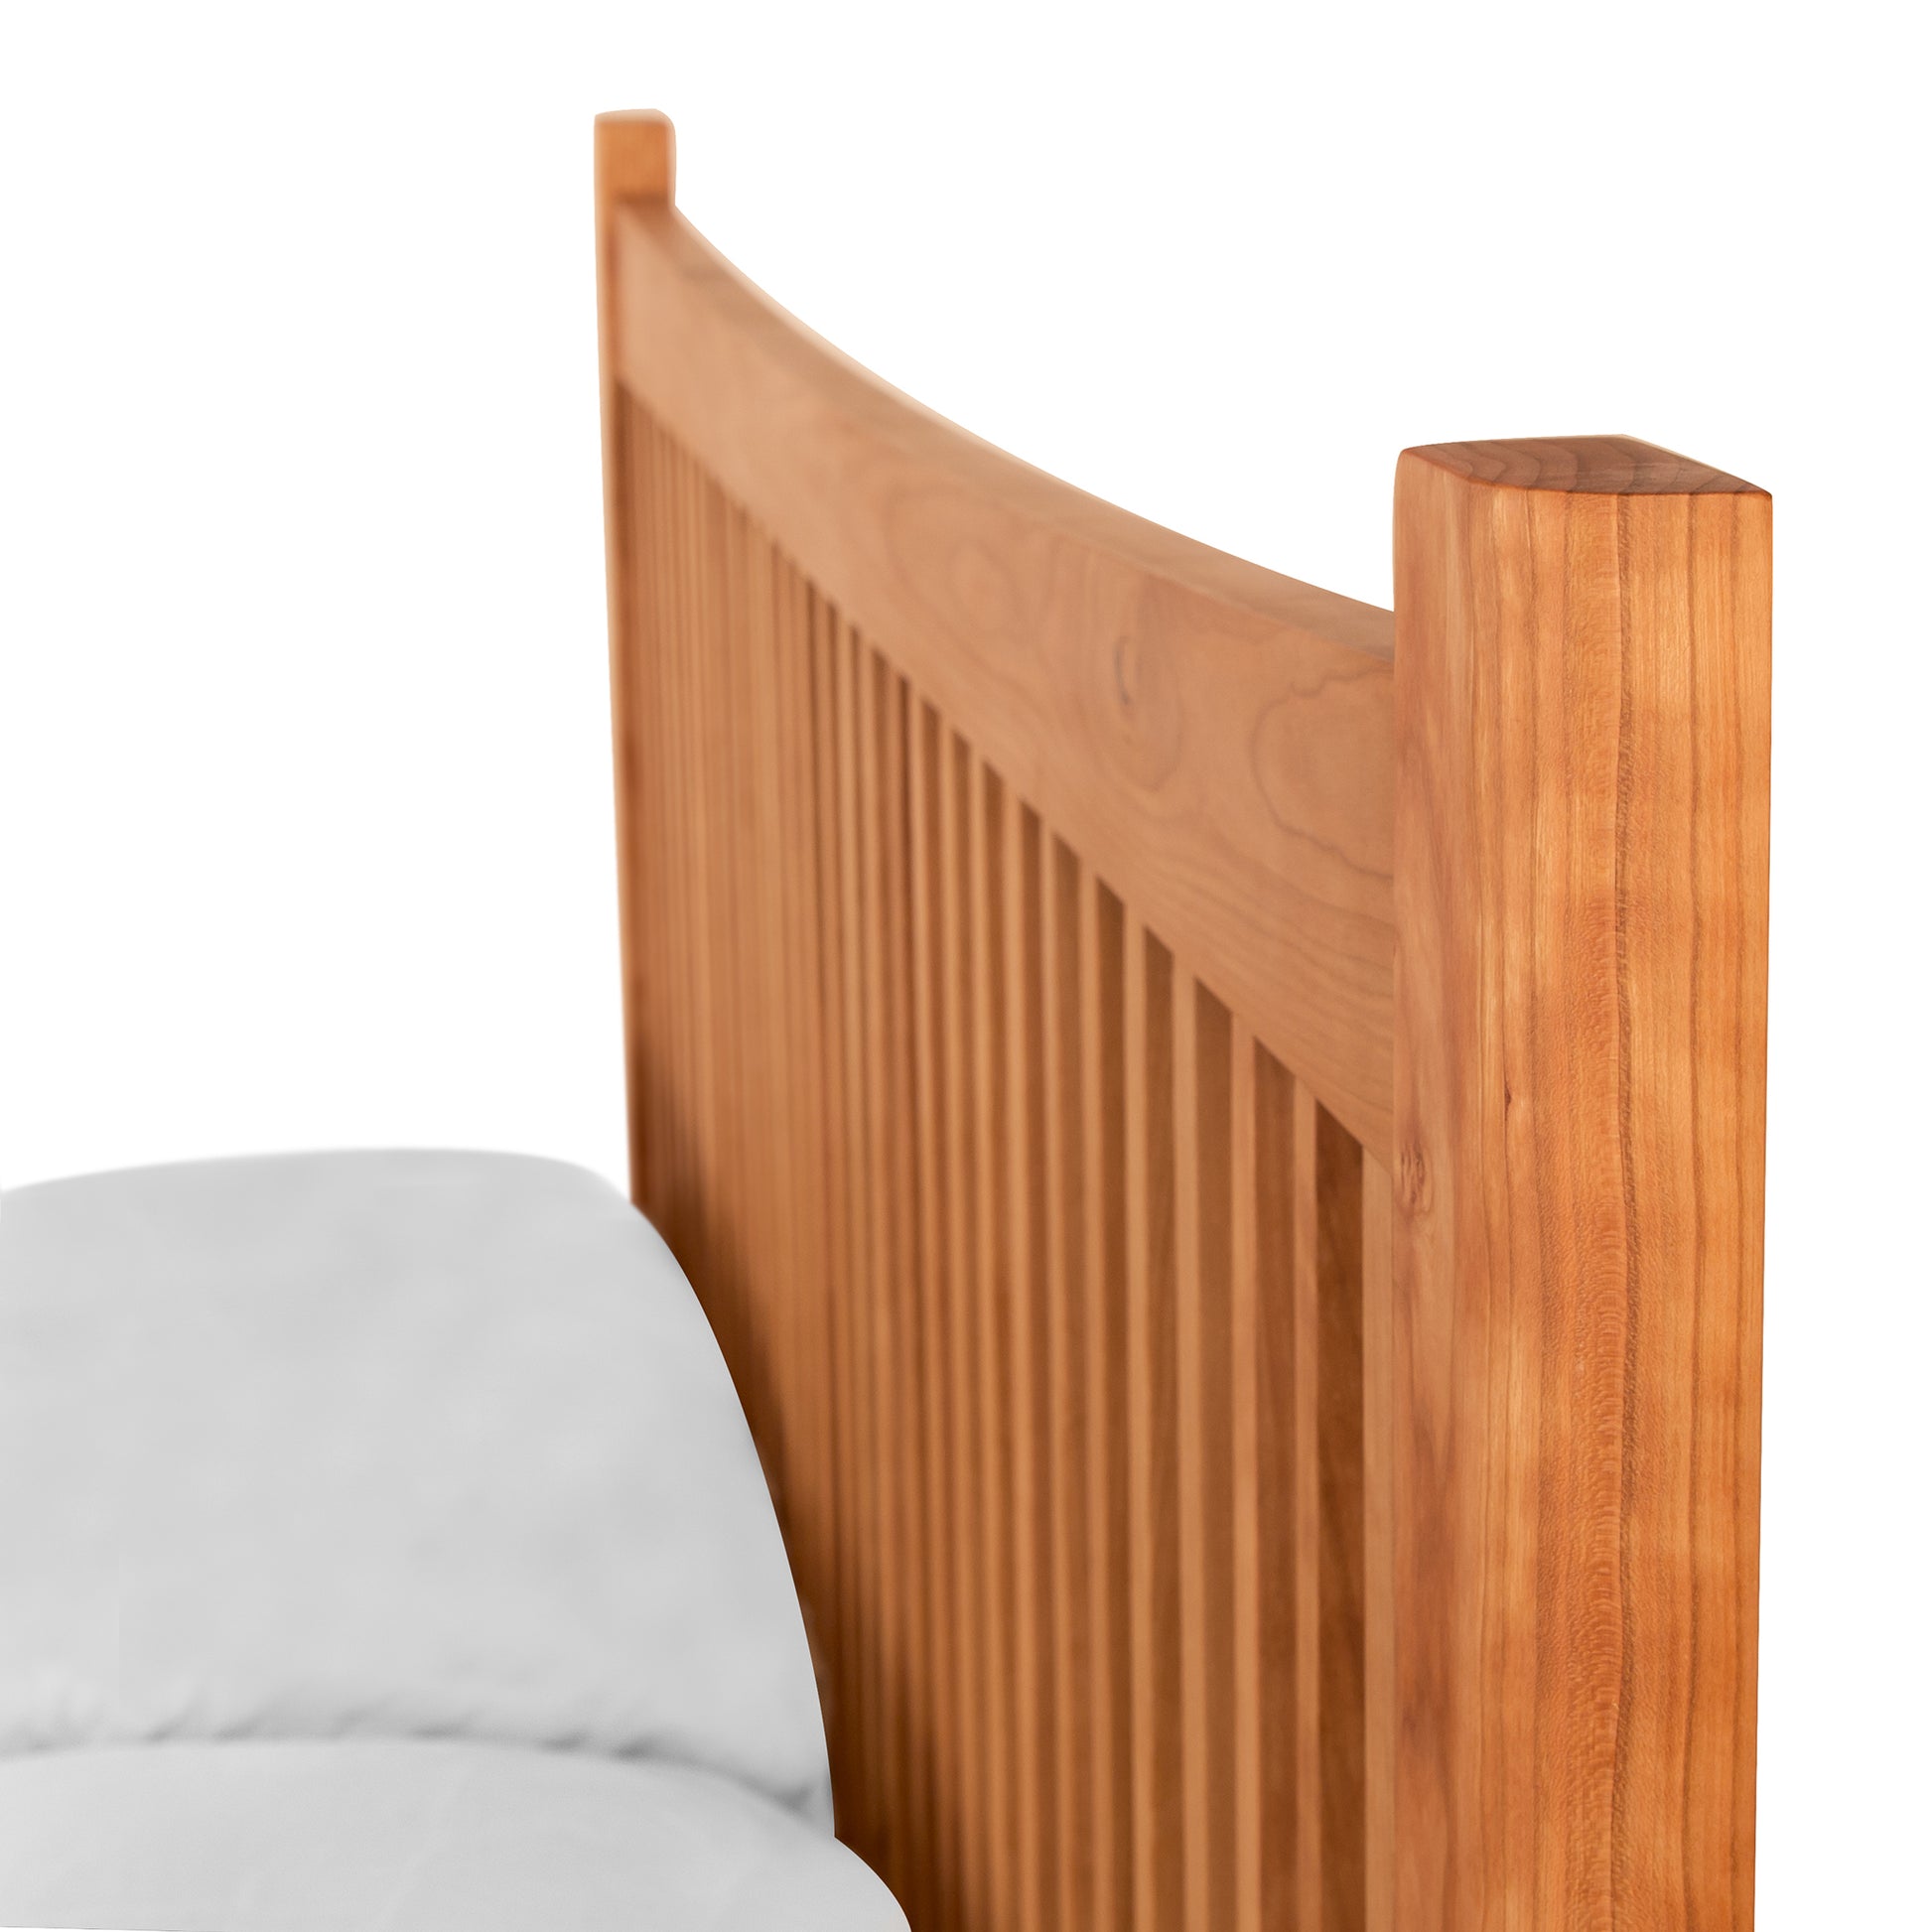 A Heartwood Shaker Low Footboard Bed by Vermont Furniture Designs on a white bed featuring Arts and Crafts styling.